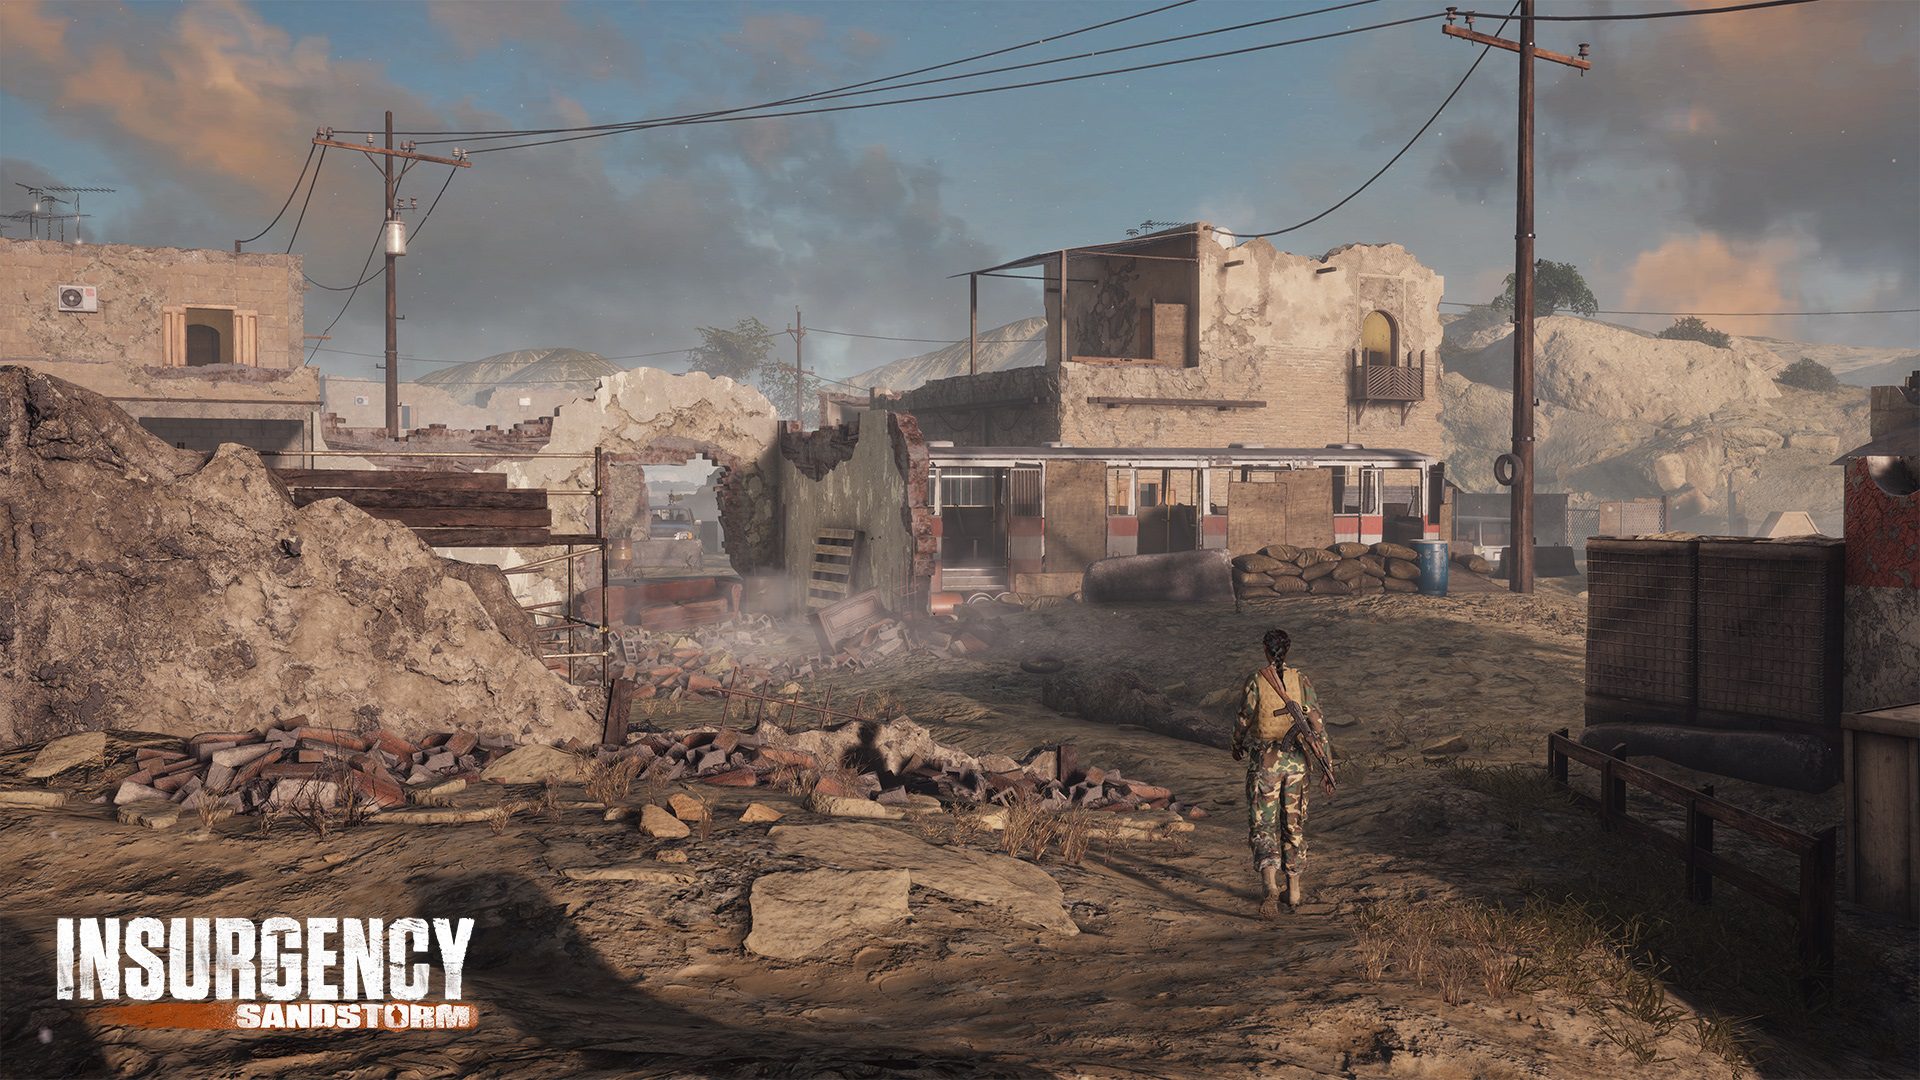 Insurgency: Sandstorm brings modern combat to PC today